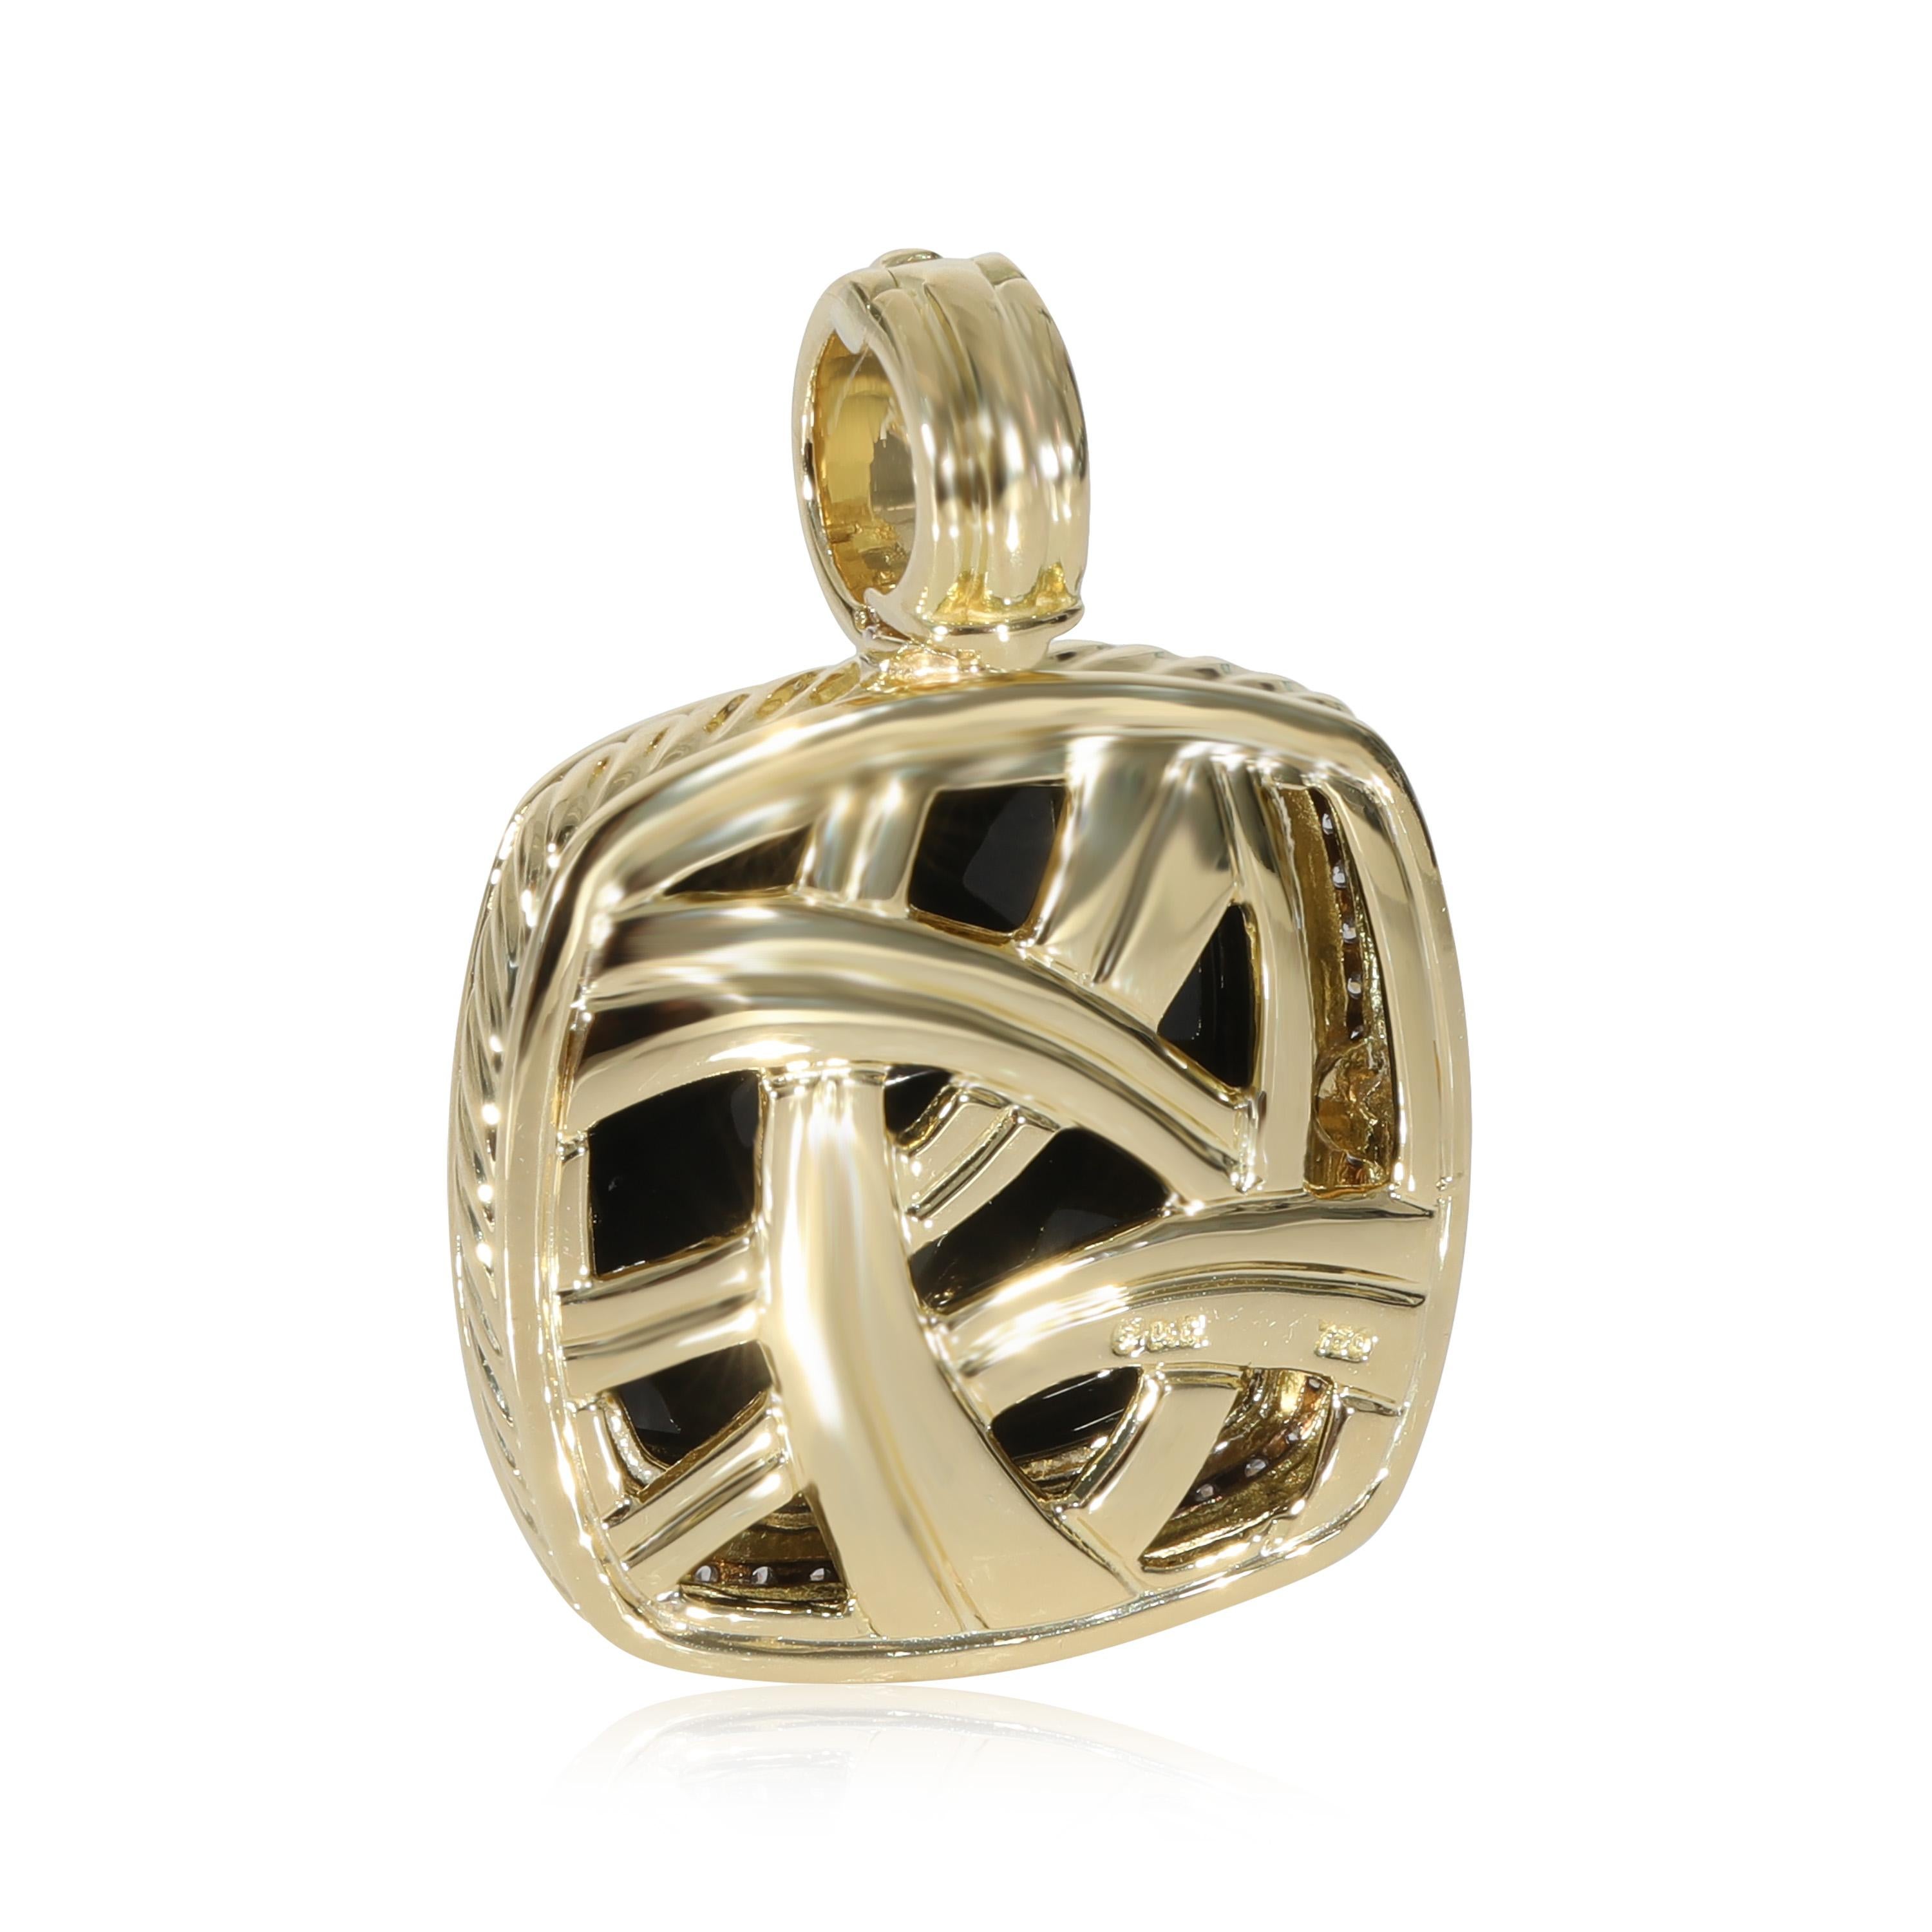 David Yurman Albion Onyx Diamond Enhancer Pendant in 18k Yellow Gold 0.50 CTW

PRIMARY DETAILS
SKU: 130486
Listing Title: David Yurman Albion Onyx Diamond Enhancer Pendant in 18k Yellow Gold 0.50 CTW
Condition Description: Introduced in 1994 and one